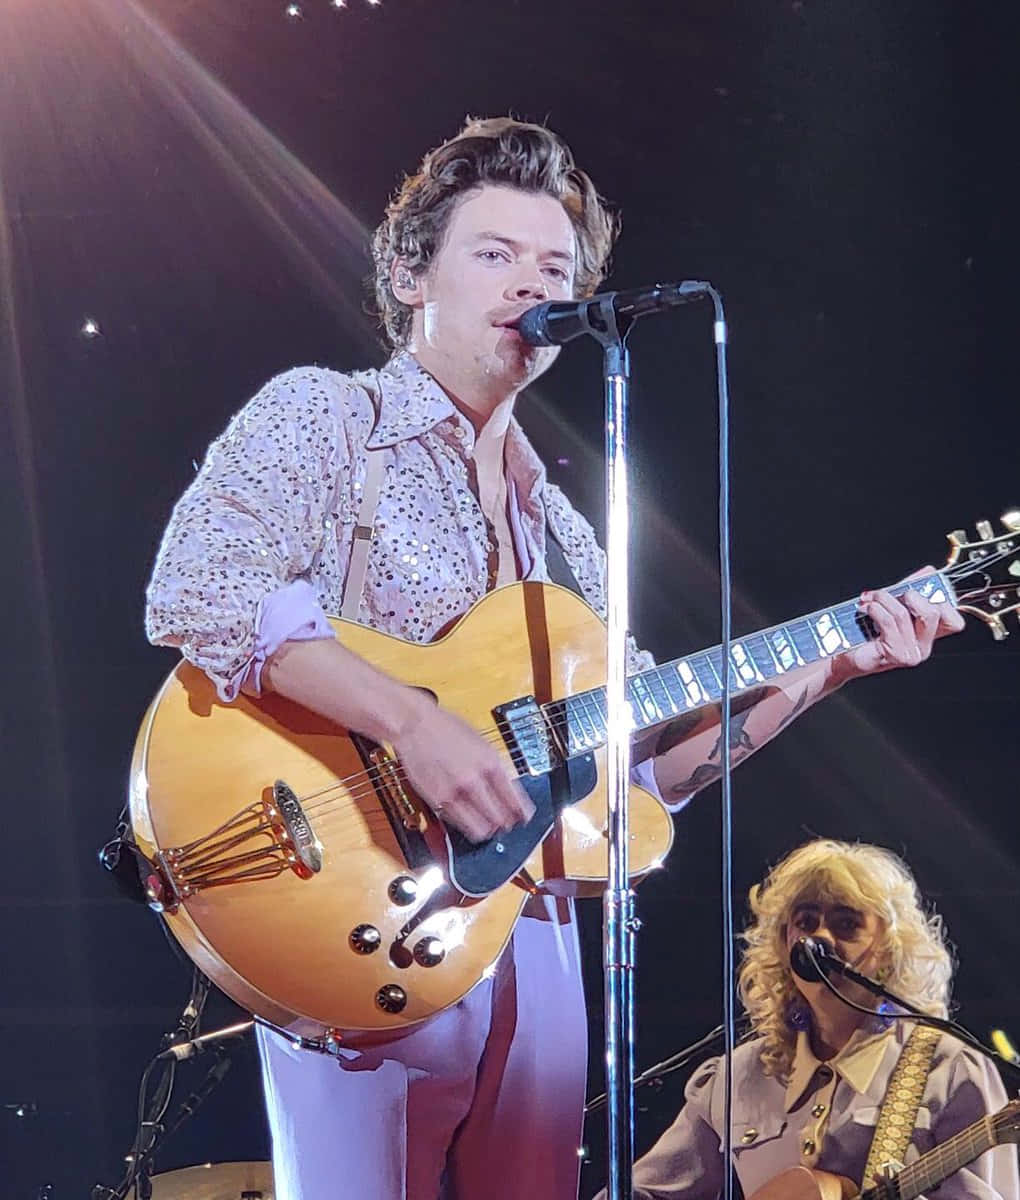 Harry Styles Stands Out as One of Music's Most Iconic Young Performers